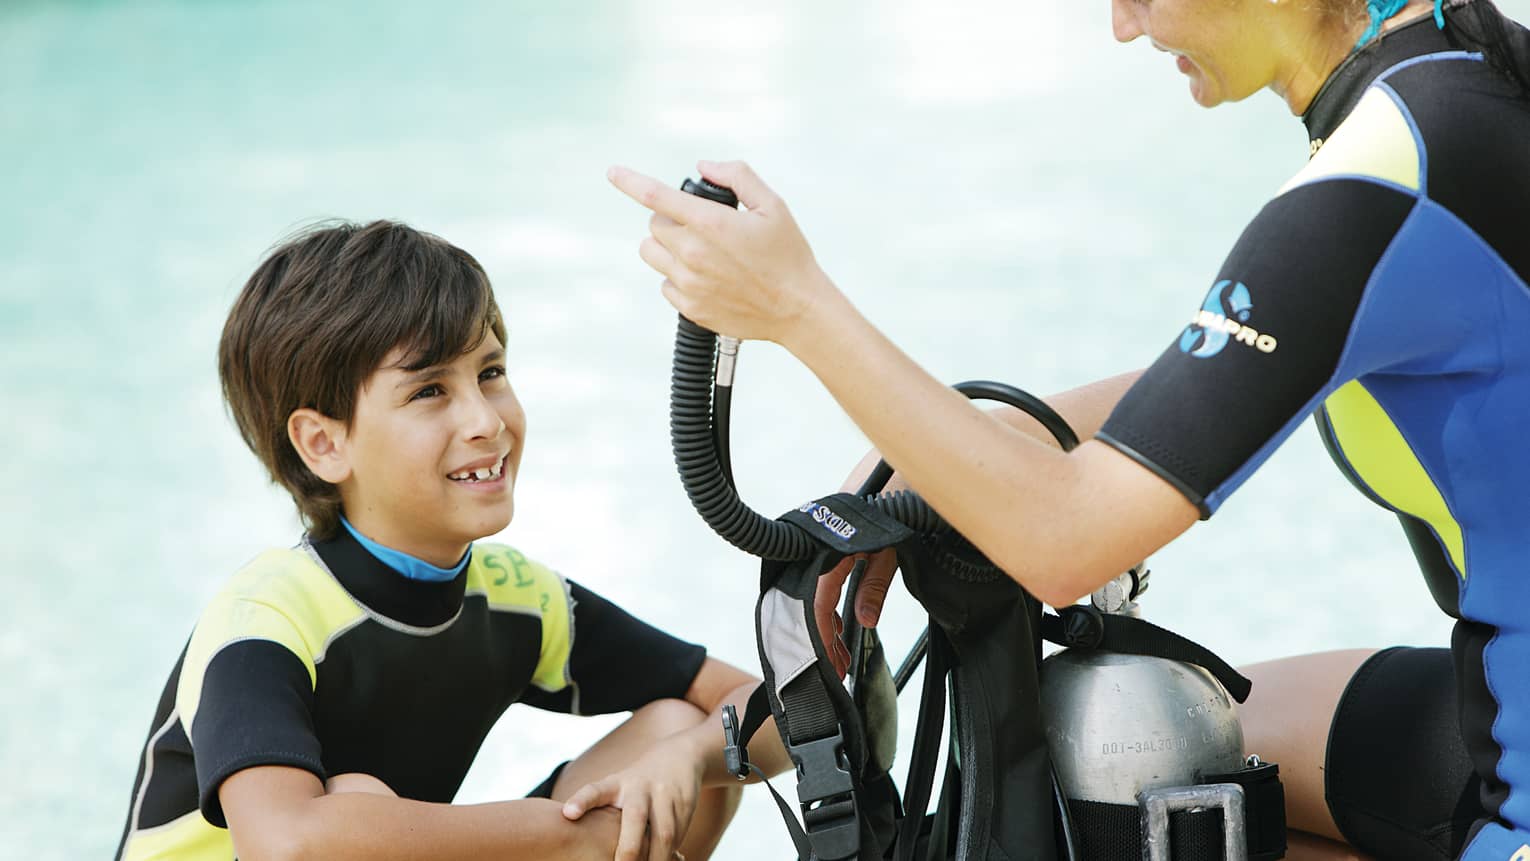 Boy in wetsuit in front of woman giving scuba diving instruction